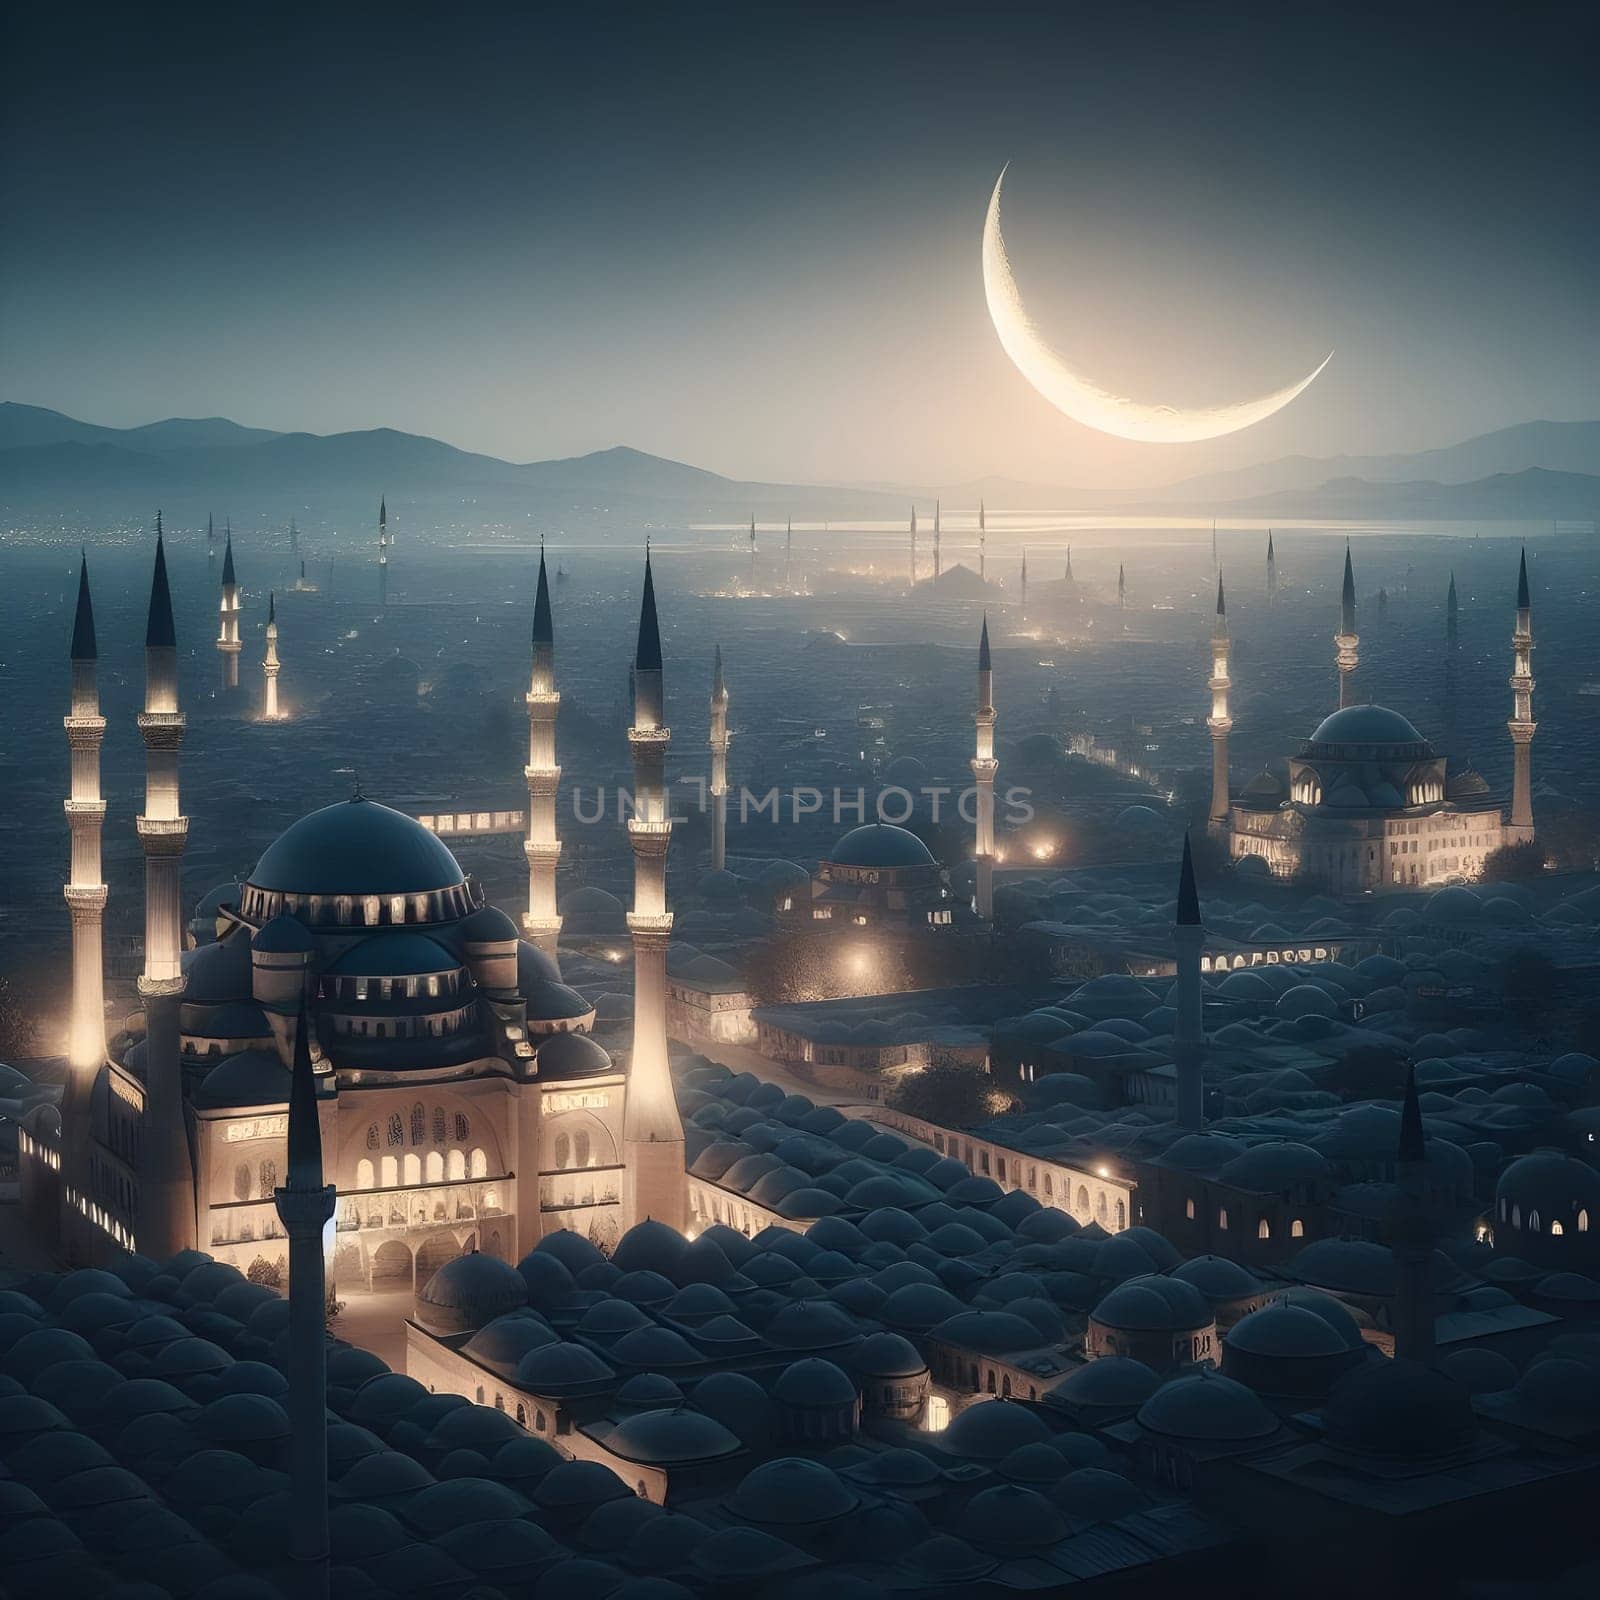 An aerial view of a city with a traditional mosque surrounded by twinkling stars, signifying the start of Ramadan by the gentle glow of only one crescent moon. Happy ramadan, ramadhan, ramazan by Designlab